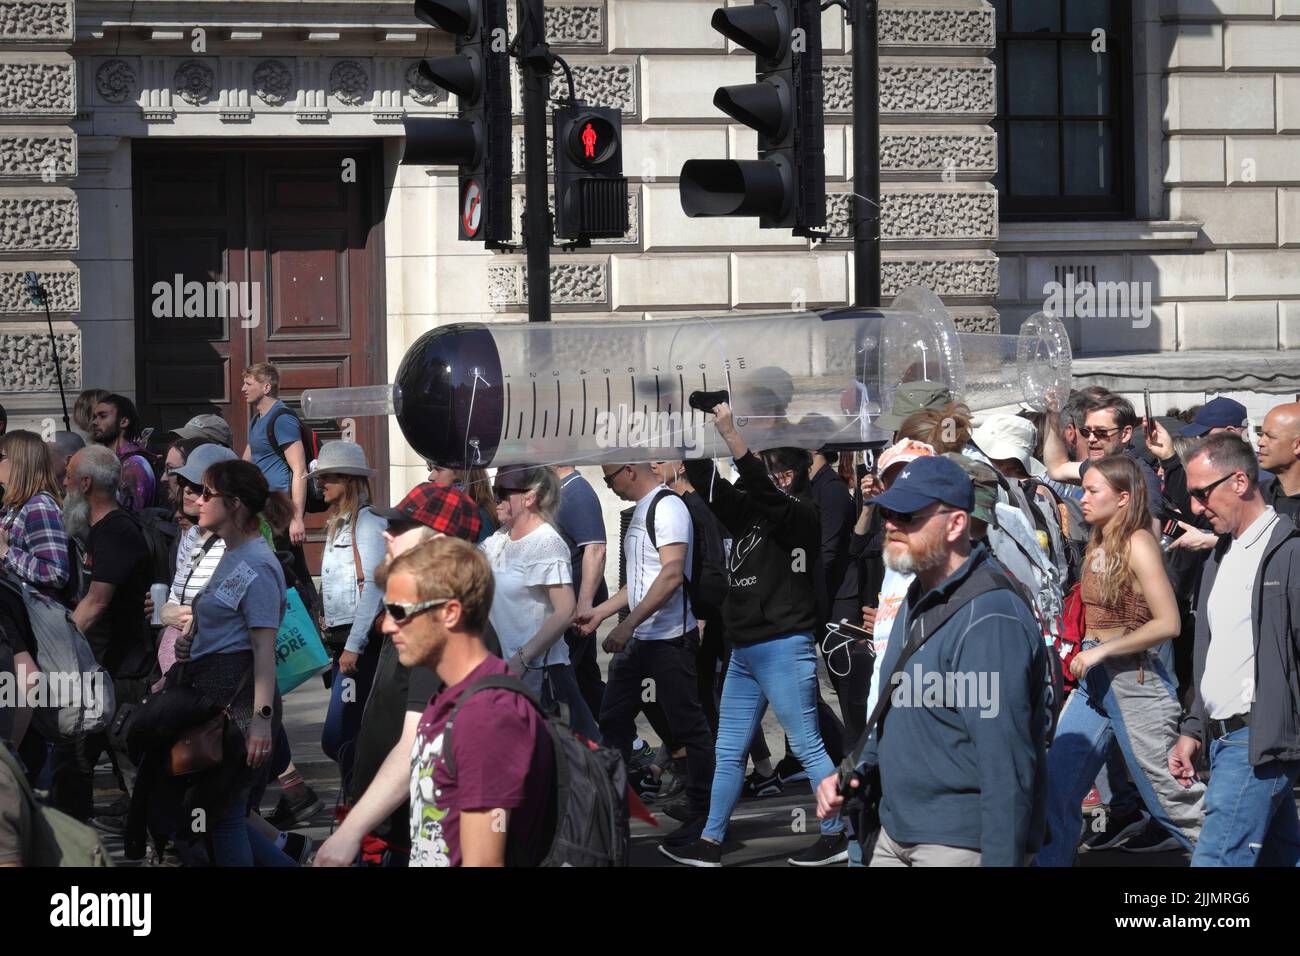 London, UK - April 24, 2021: 'Unite for Freedom' protest by covid-19 sceptics, demonstrators opposing lockdown, vaccination, mask-wearing, etc. Stock Photo